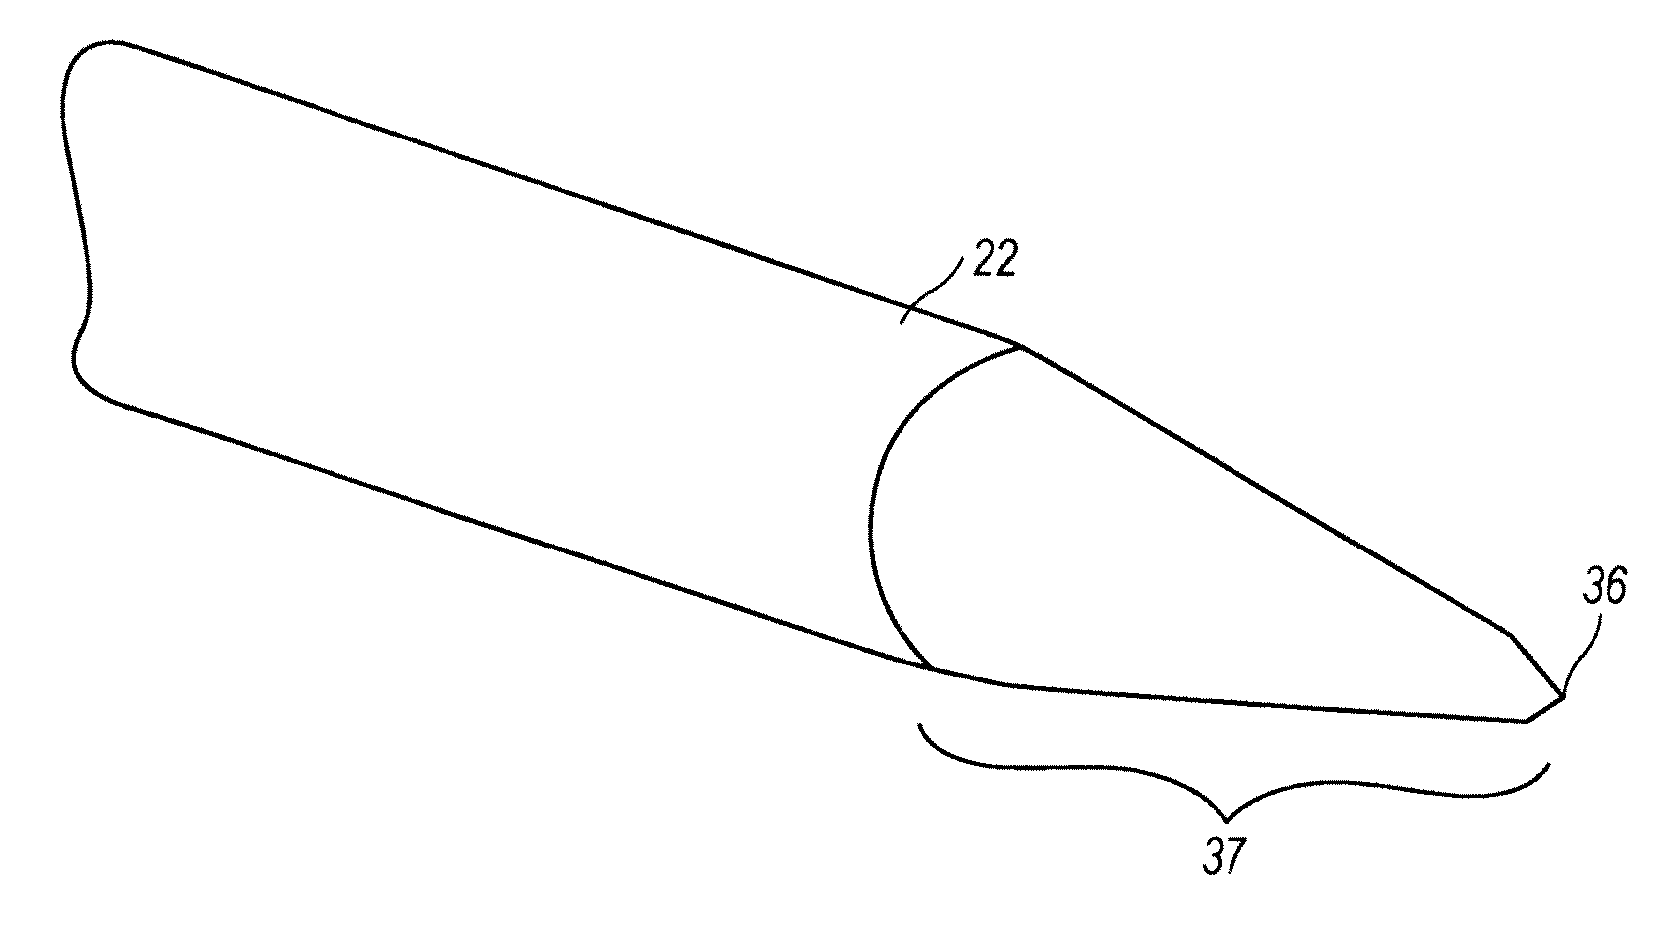 Supersonic Aircraft with Spike for Controlling and Reducing Sonic Boom